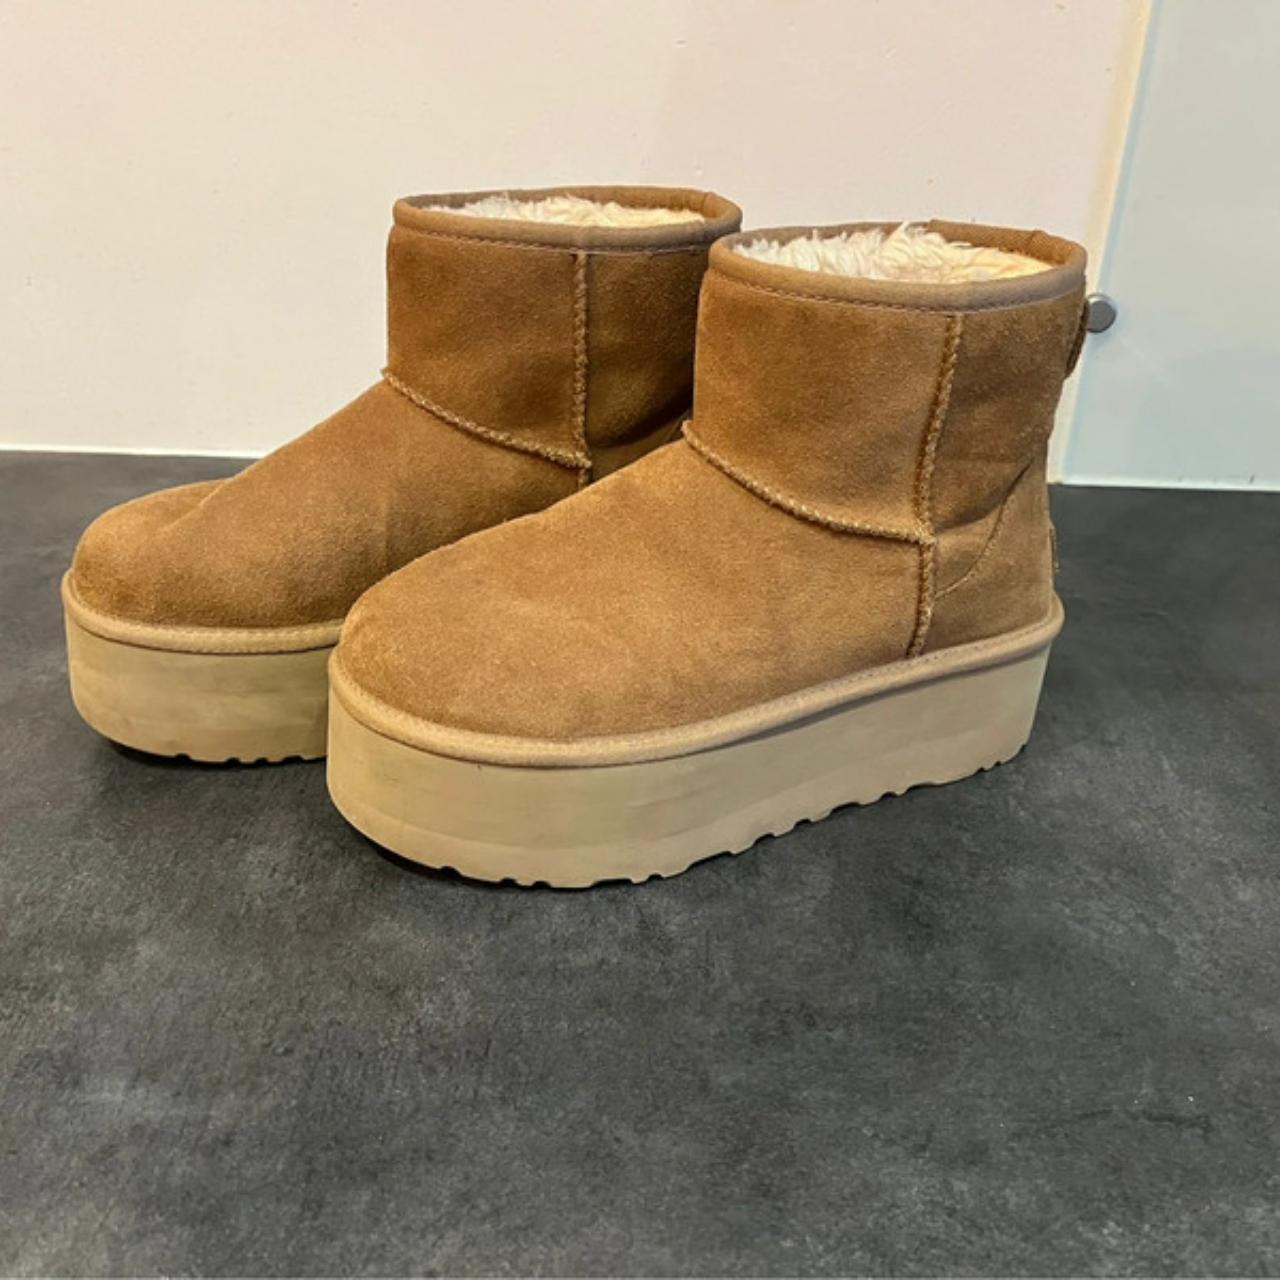 UGG Classic Mini II Boots in Hickory Size 5 Brand... - Depop